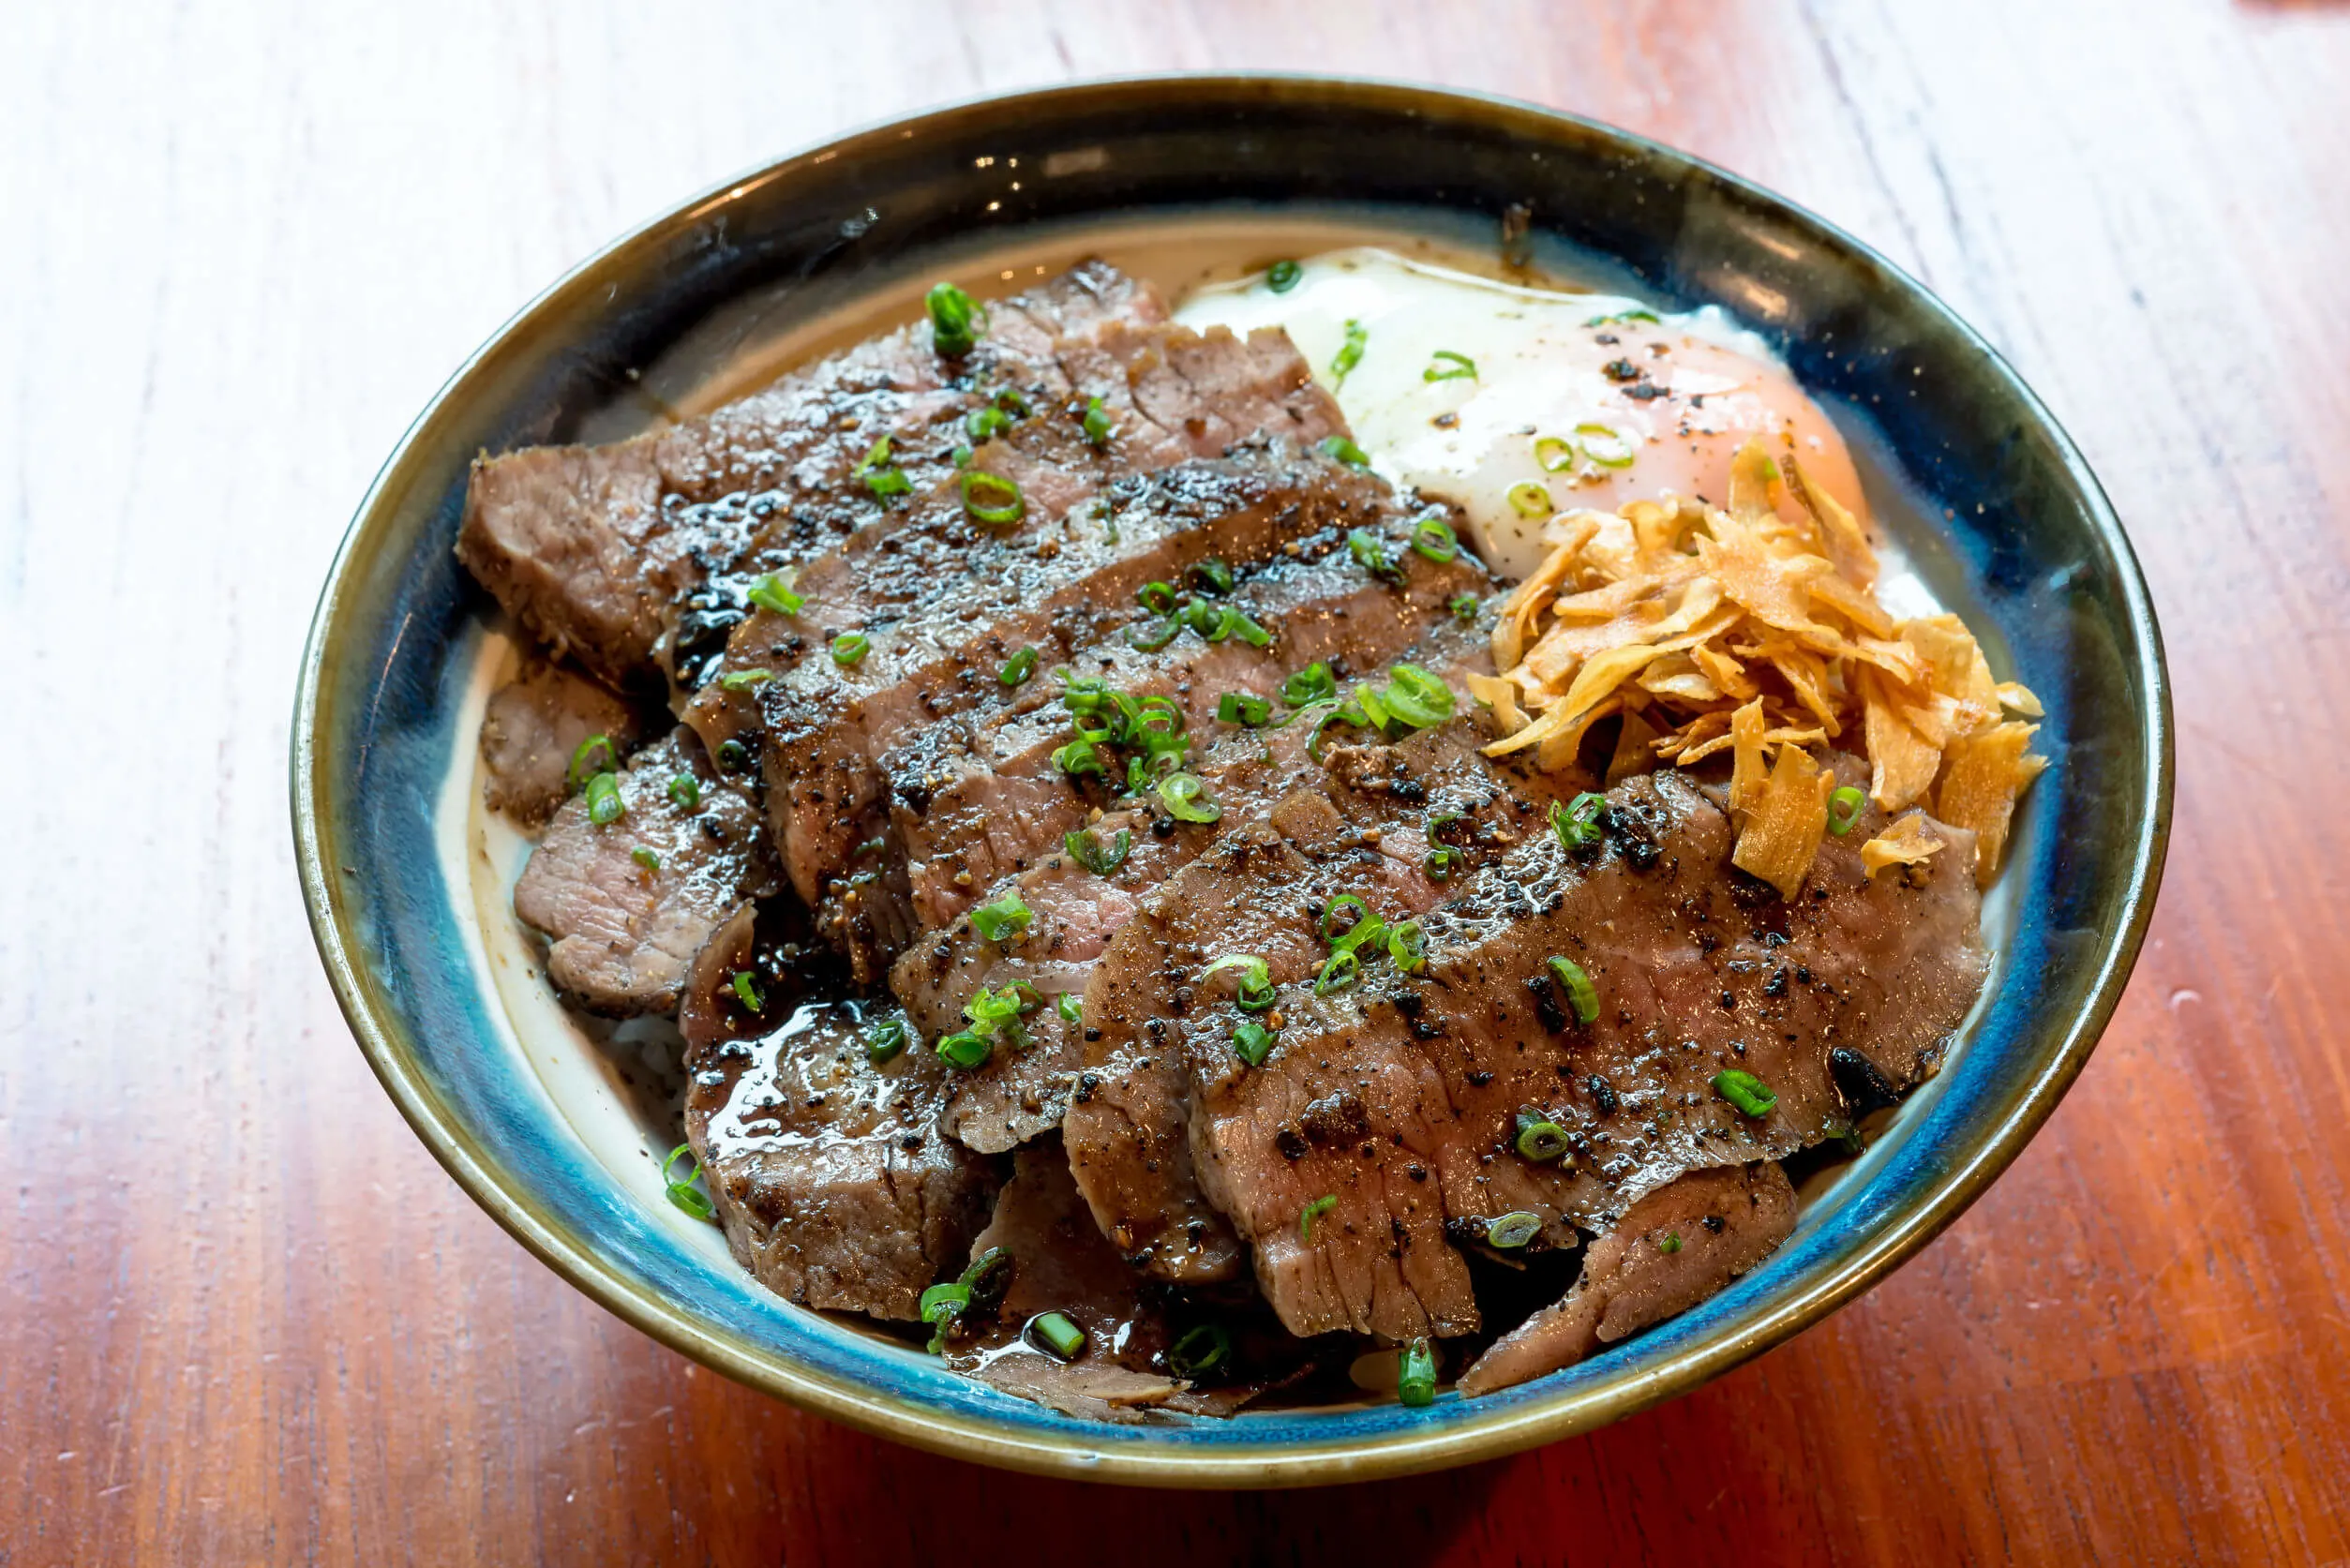 Beef Steak Donburi with egg and fried garlic